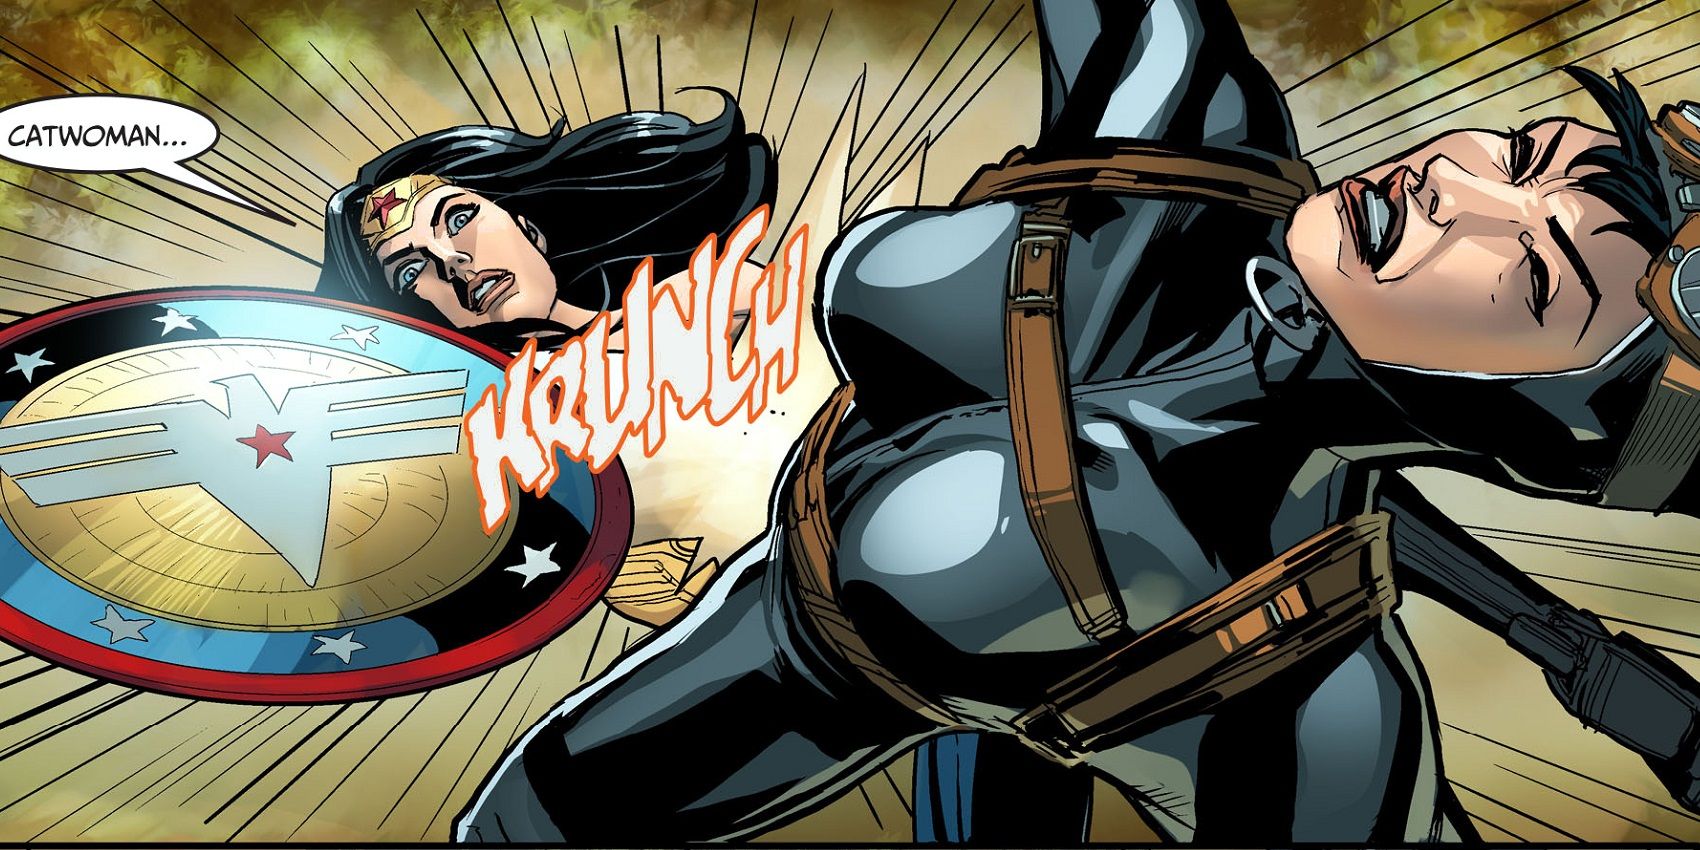 Wonder Woman beats Catwoman in the Injustice comic